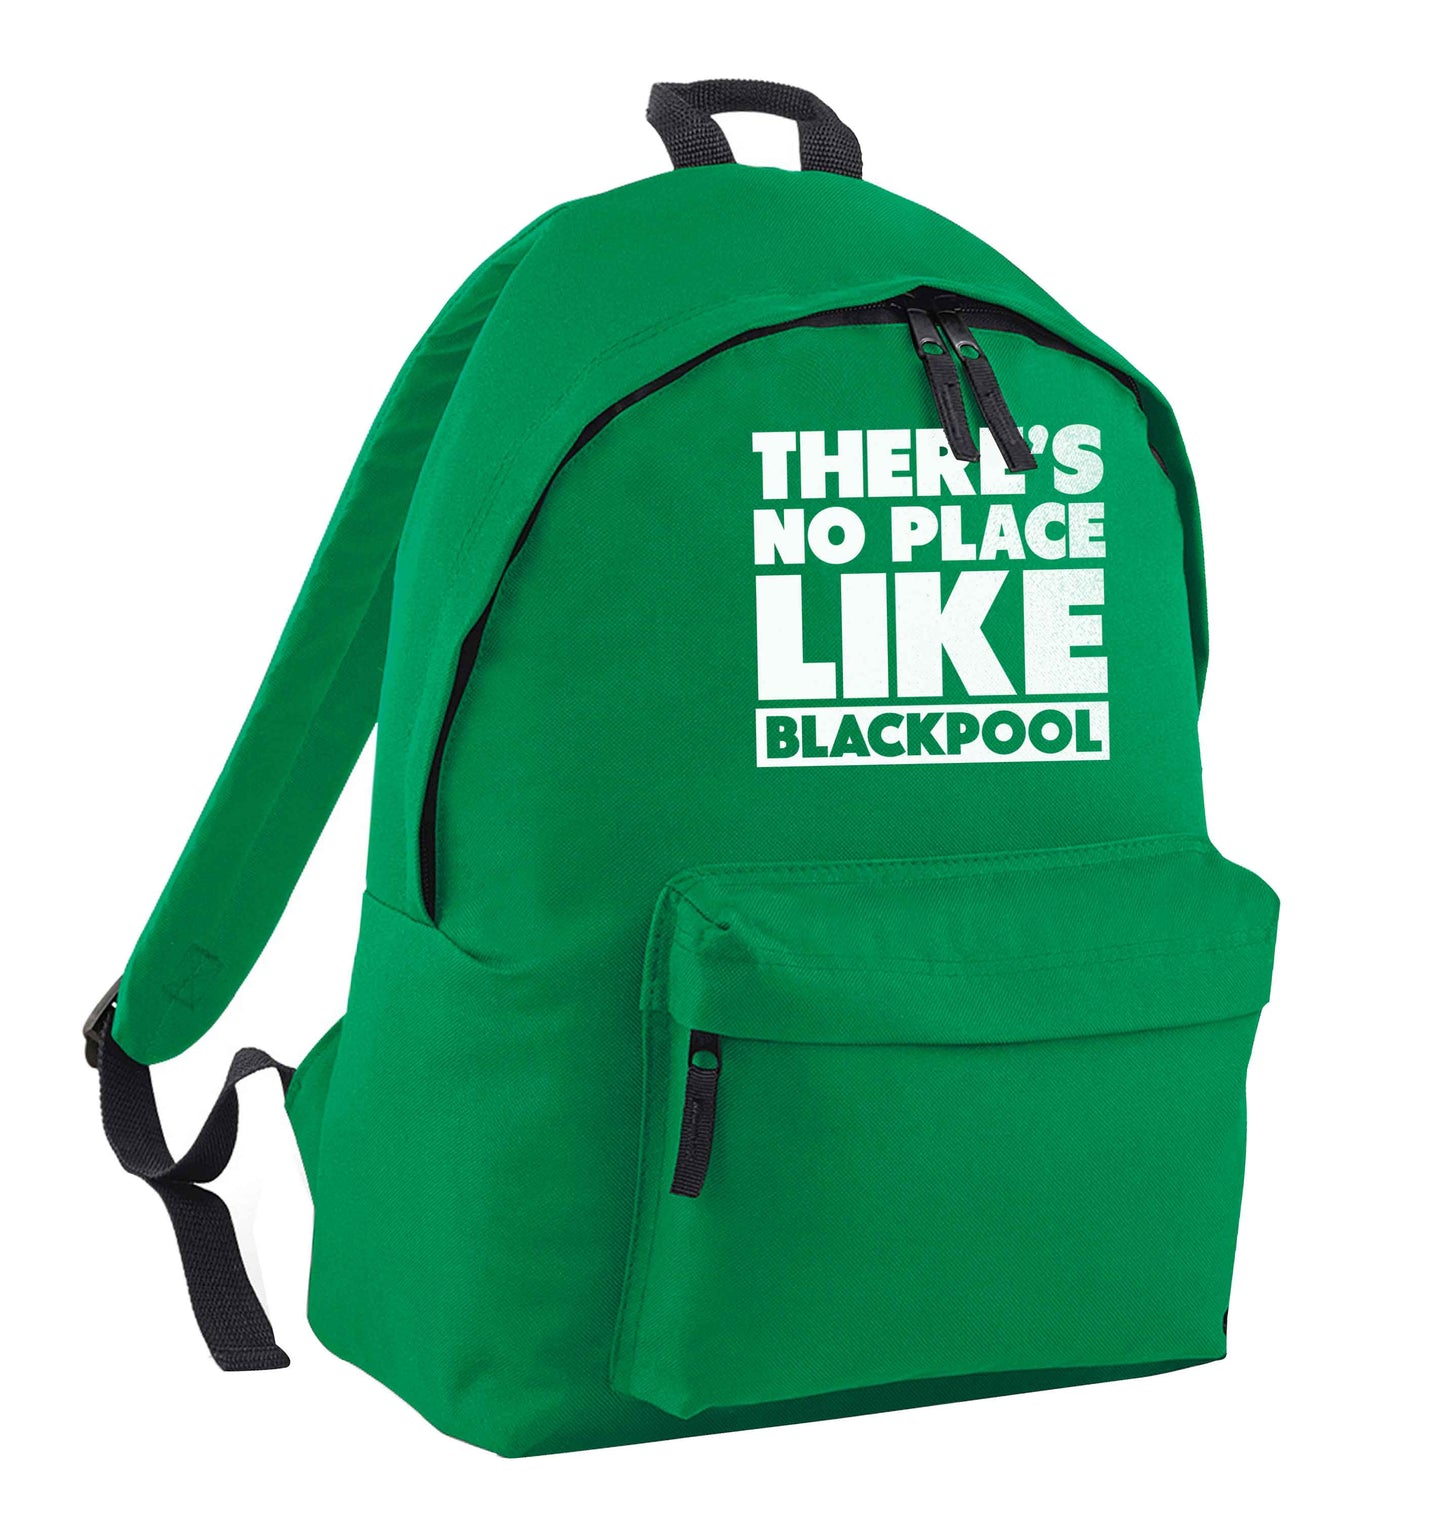 There's no place like Blackpool green adults backpack